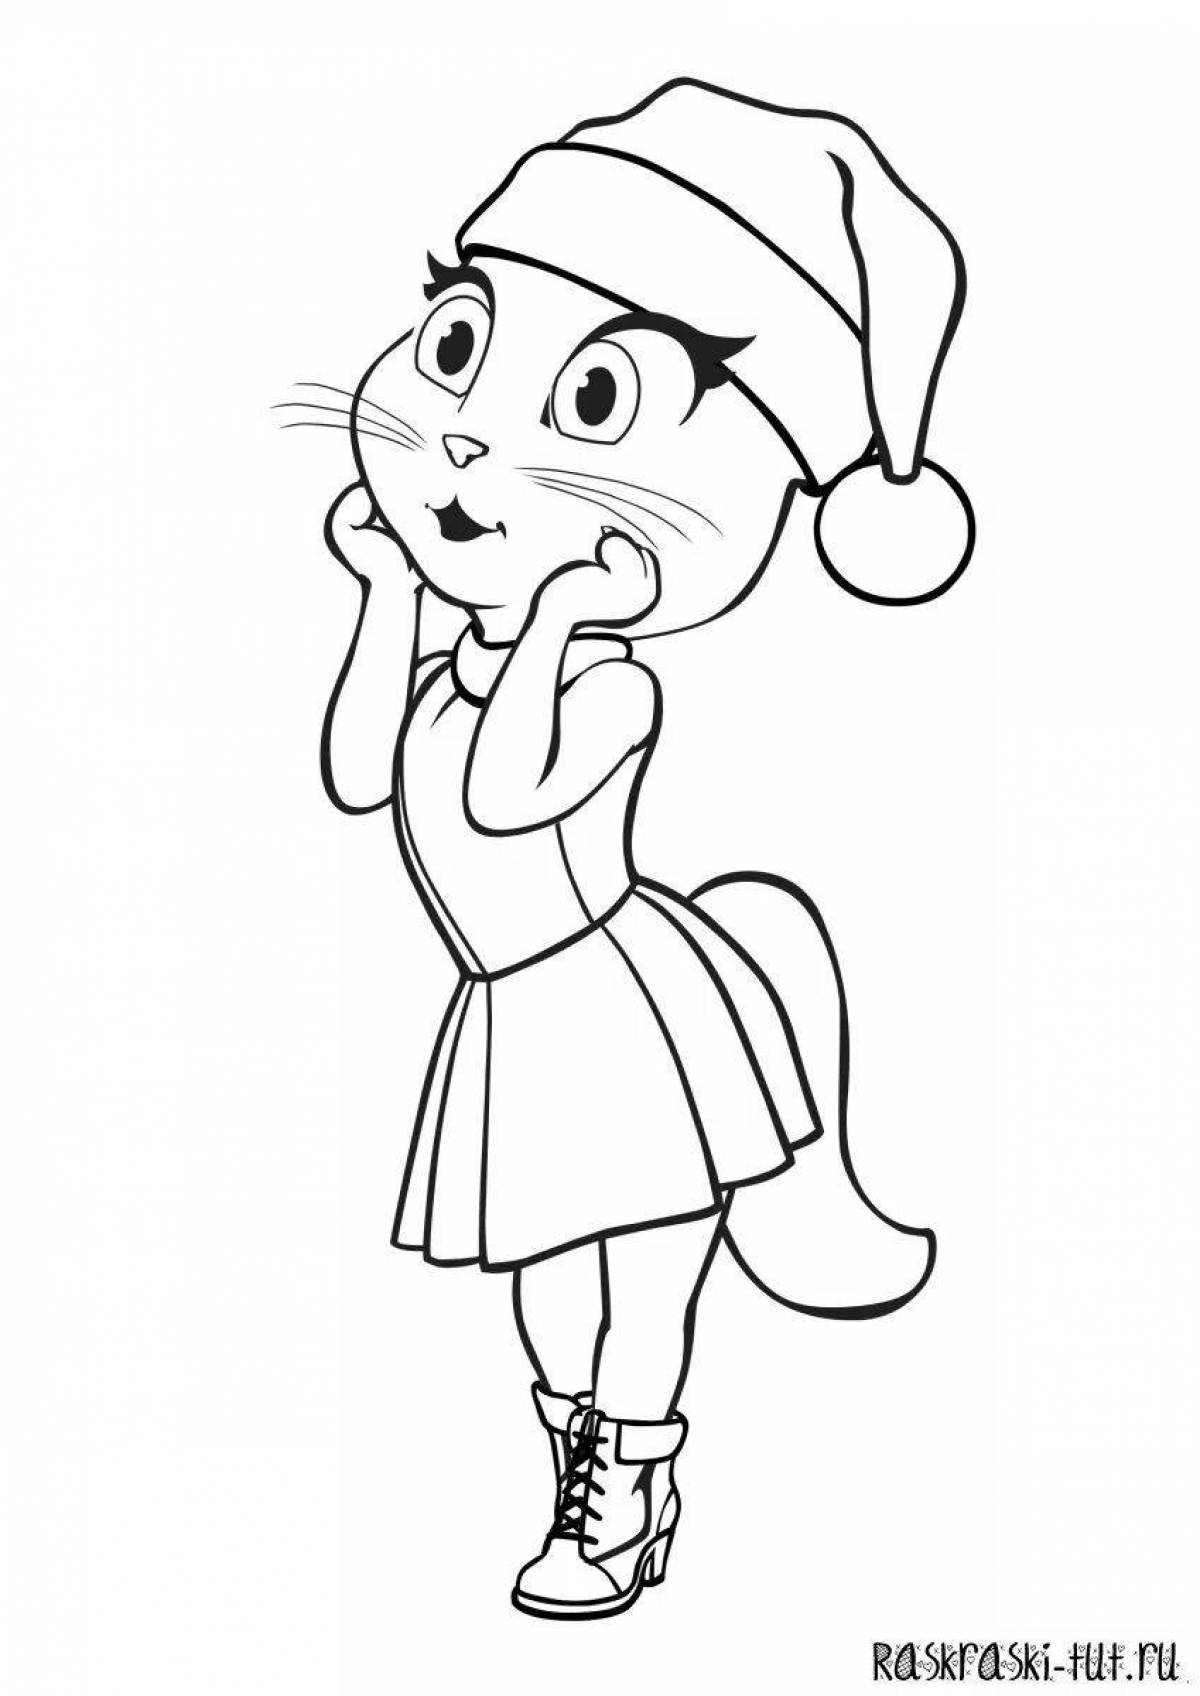 Charming angela cat coloring book